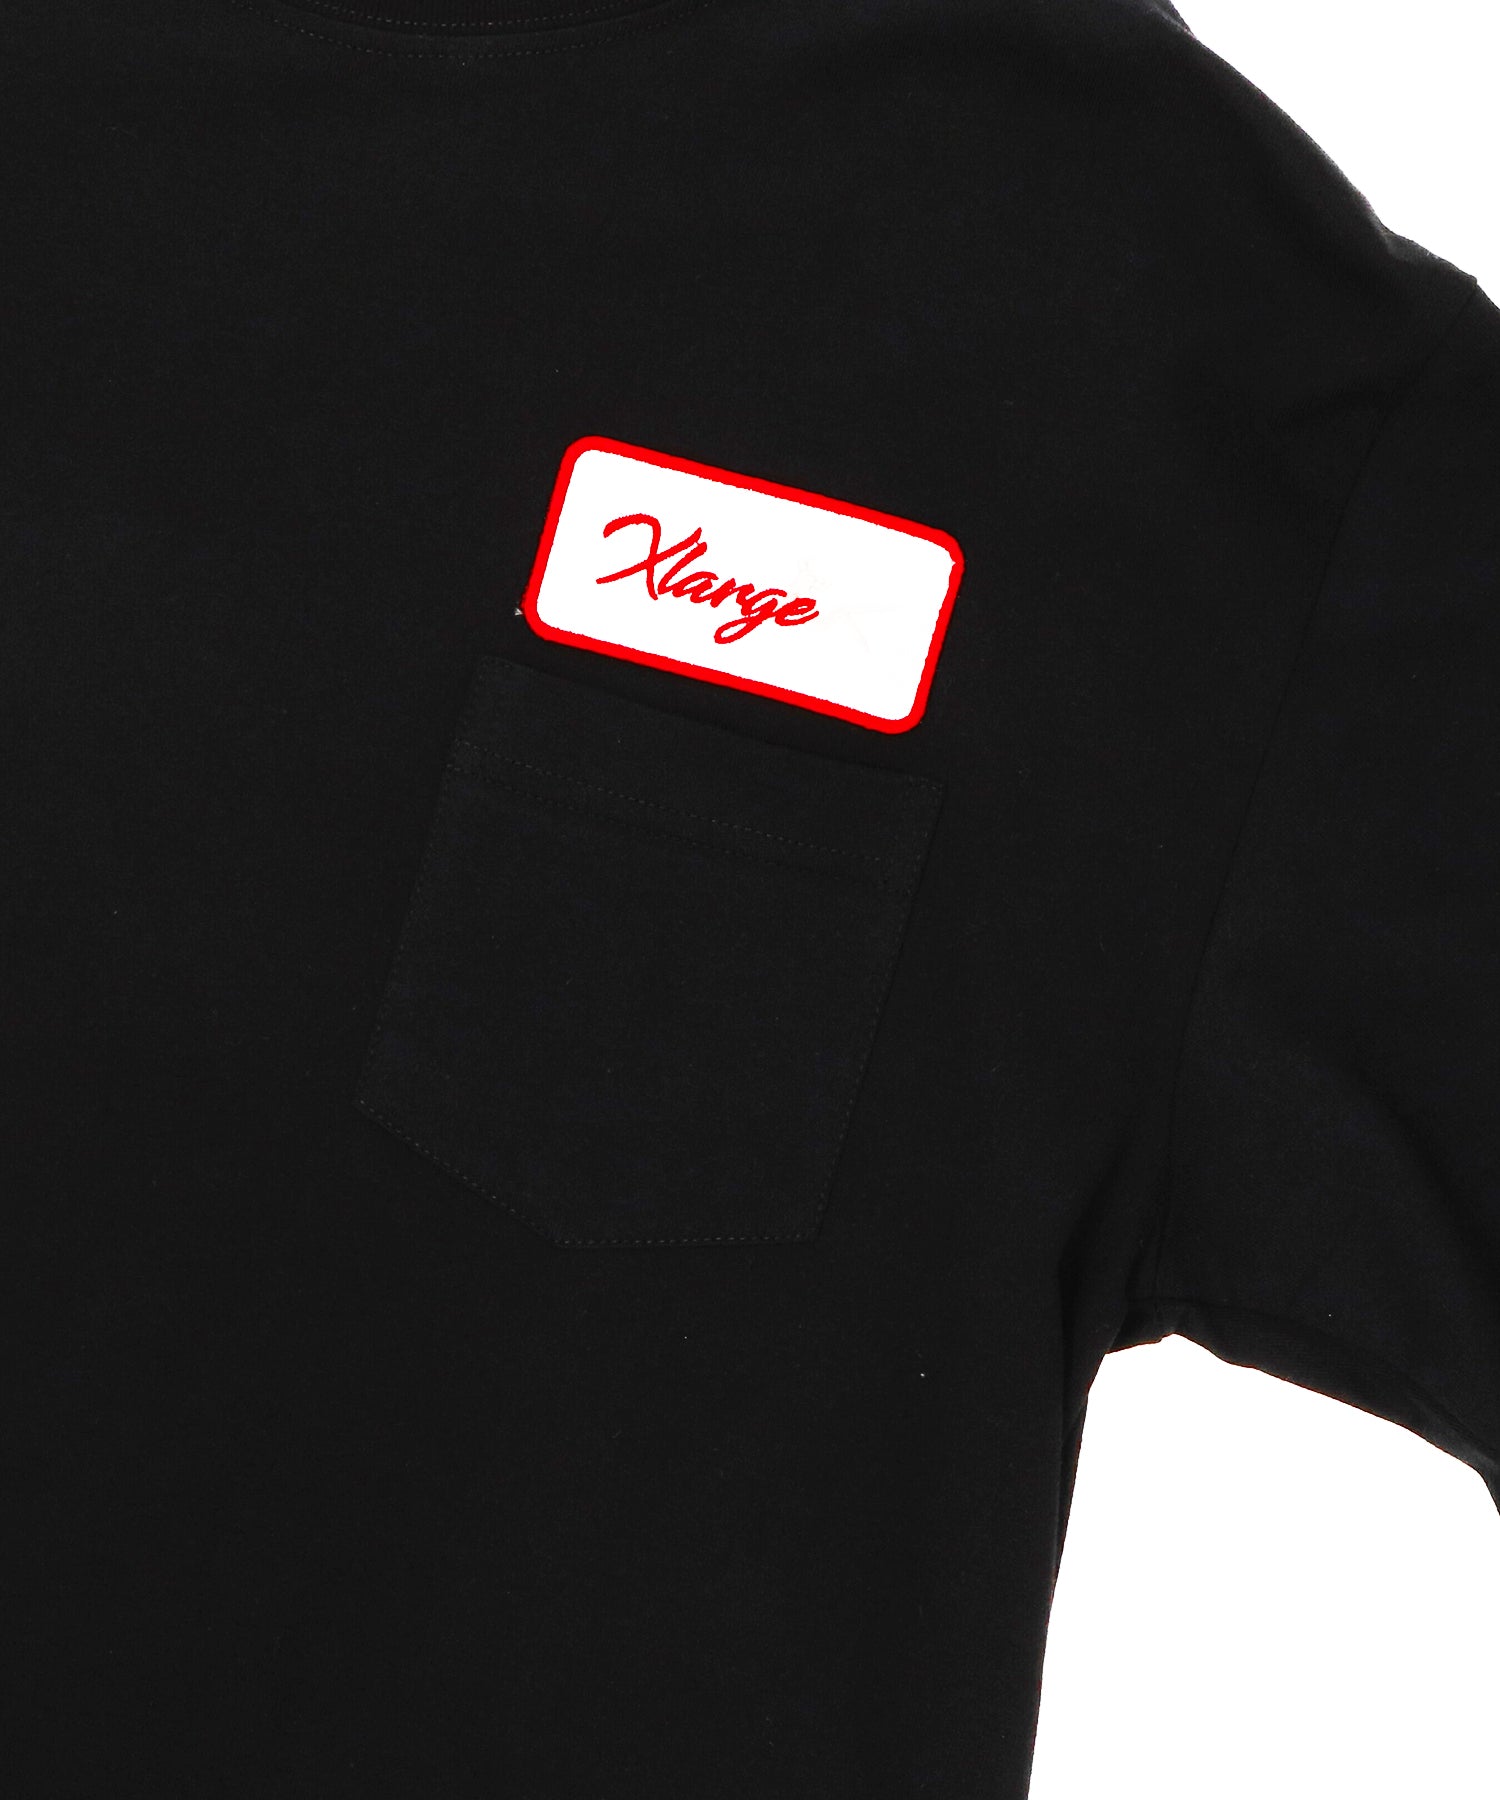 S/S PATCH POCKET TEE T-SHIRT XLARGE  